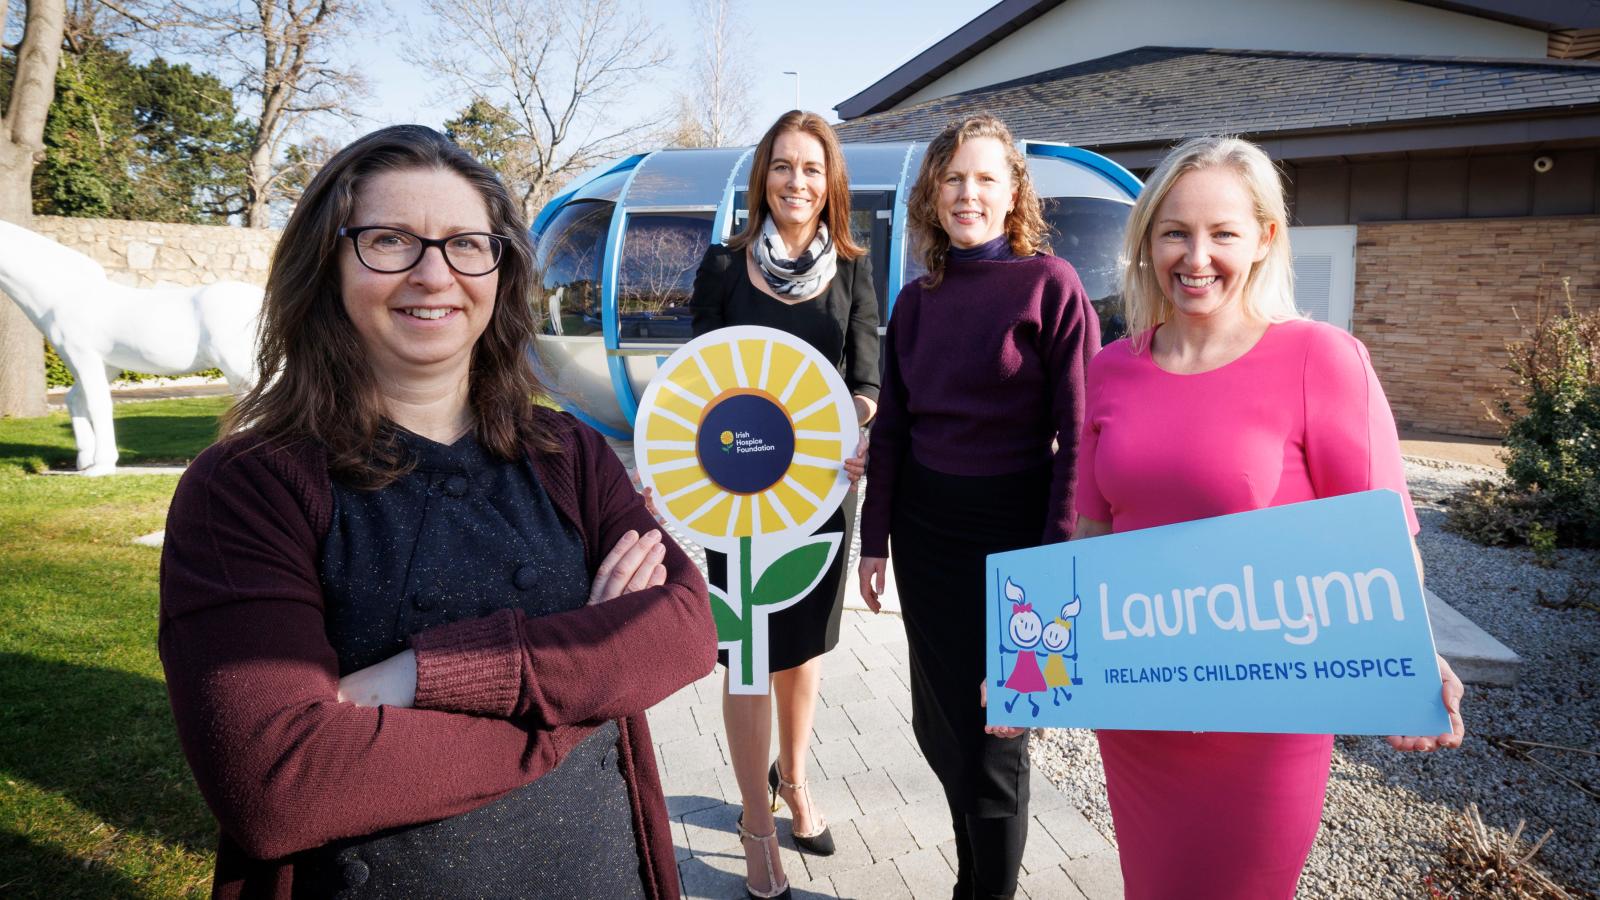 LauraLynn and Irish Hospice Foundation to Benefit from Investment in Children’s Palliative Care Research 